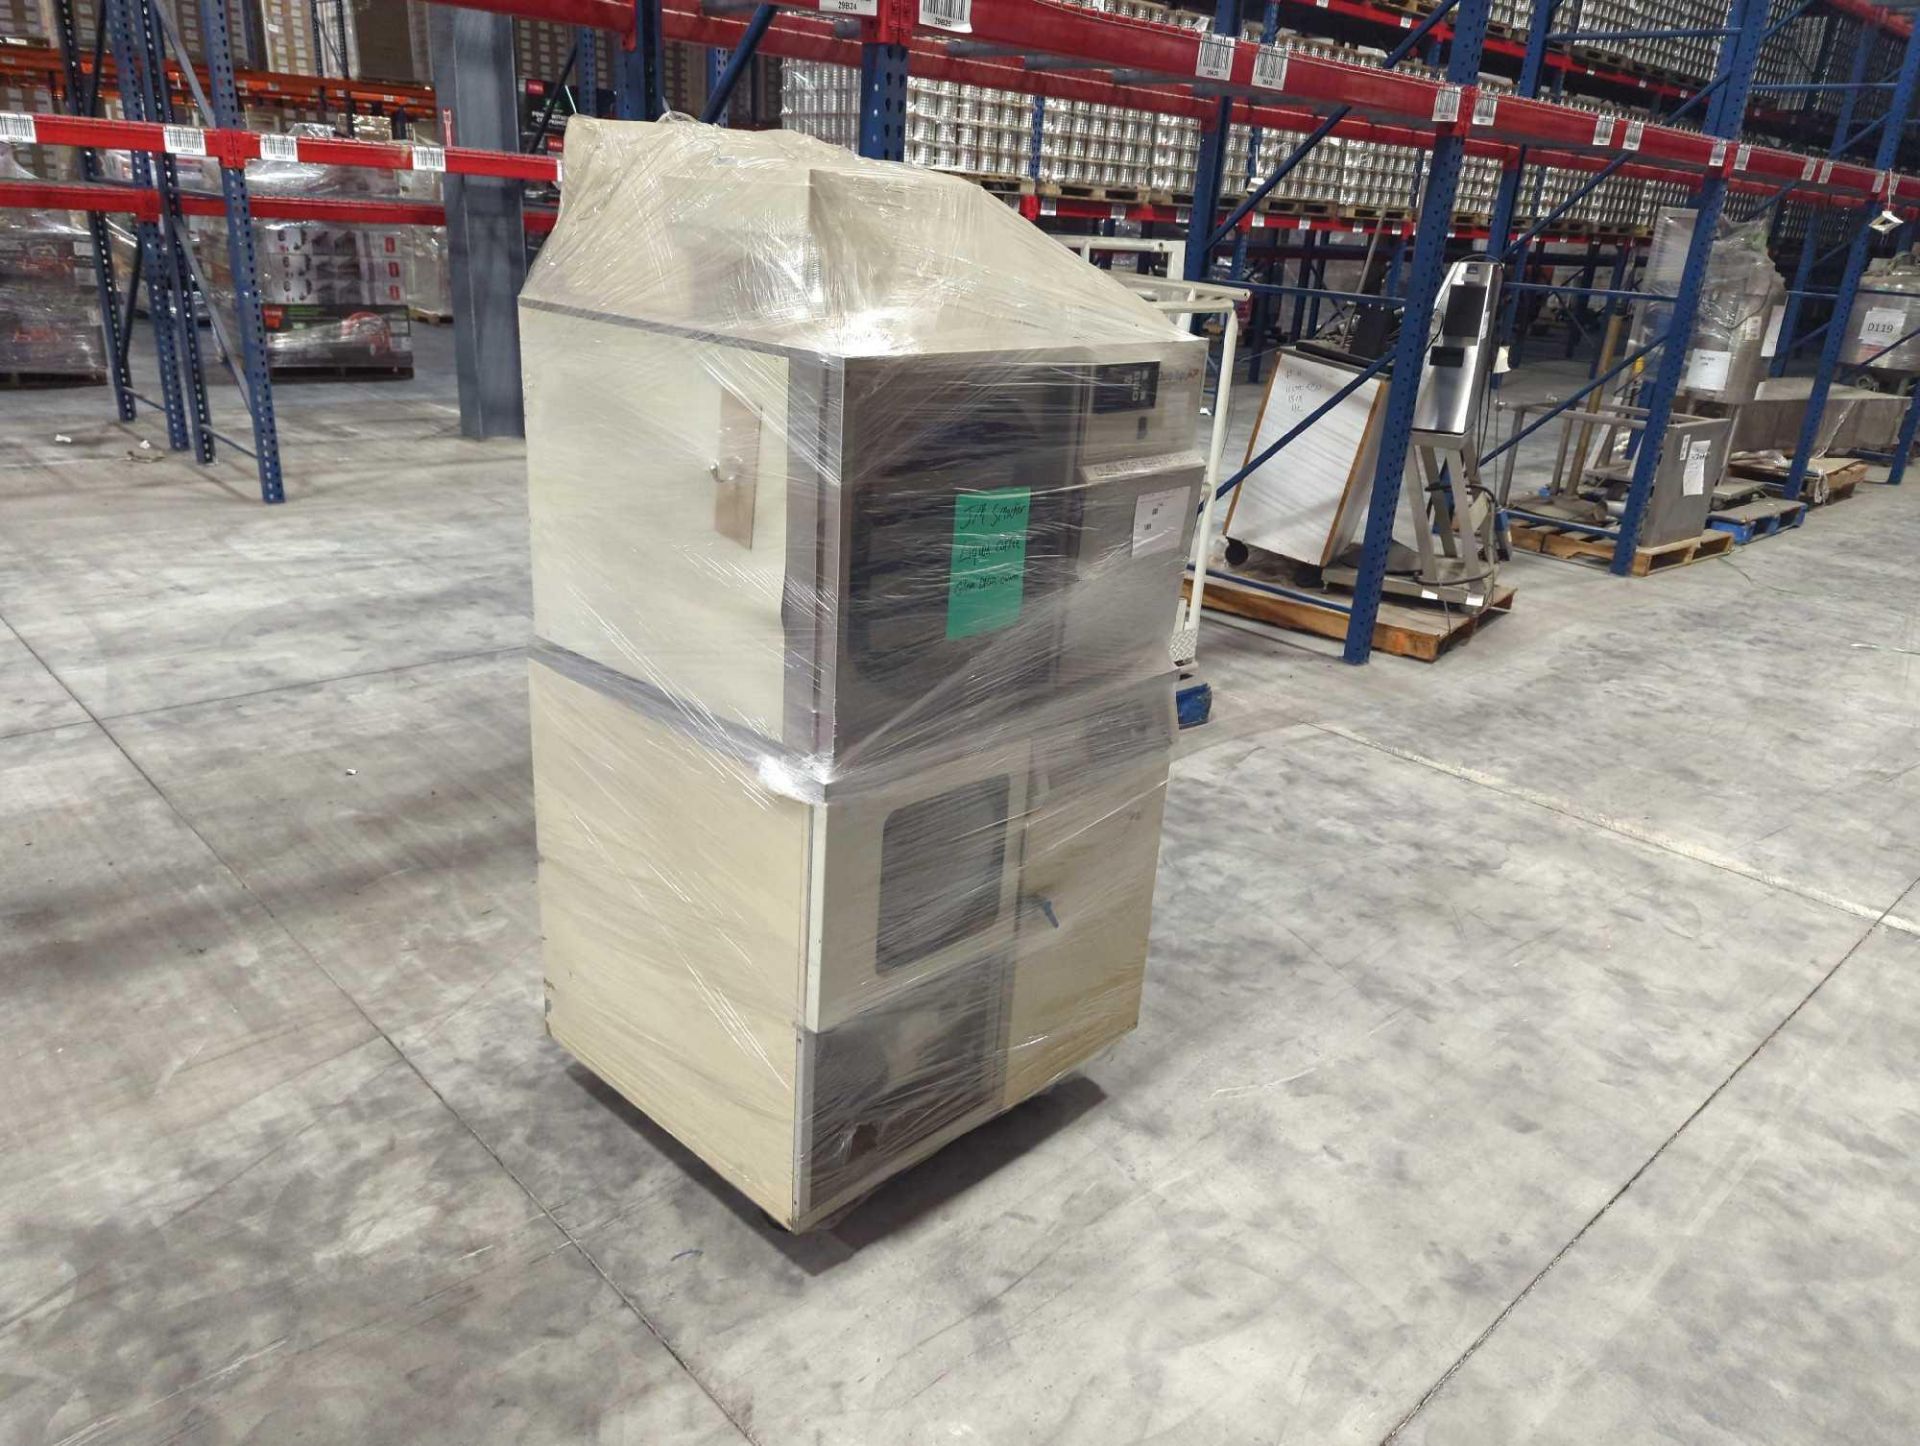 Duratop MP bulk tray dryer and corrosion resistant freeze dryer